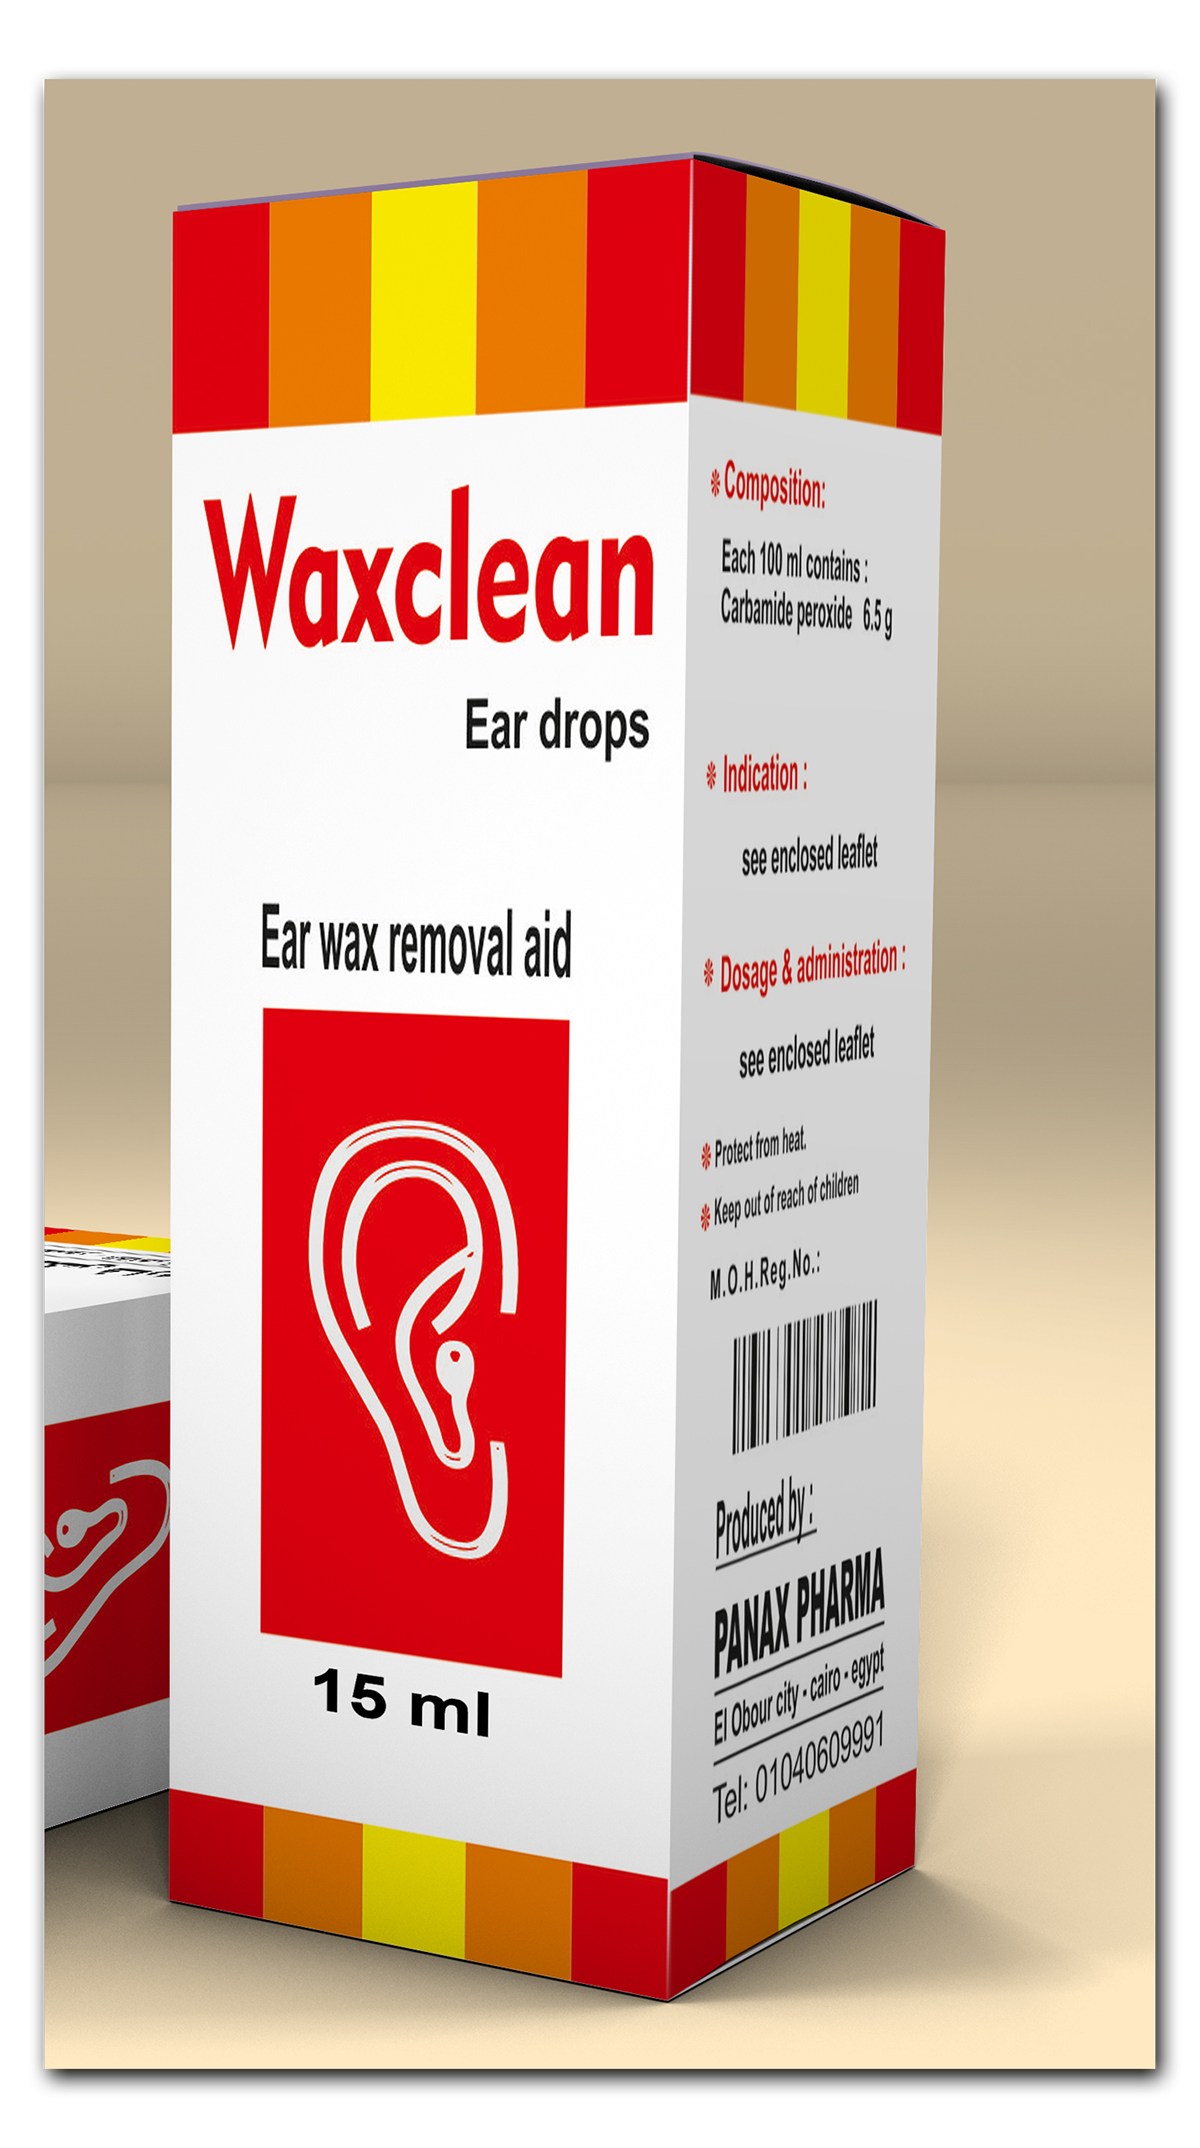 Packaging Waxclean packaging box Waxclean  mohamed Designer aooloon aooloon Designer